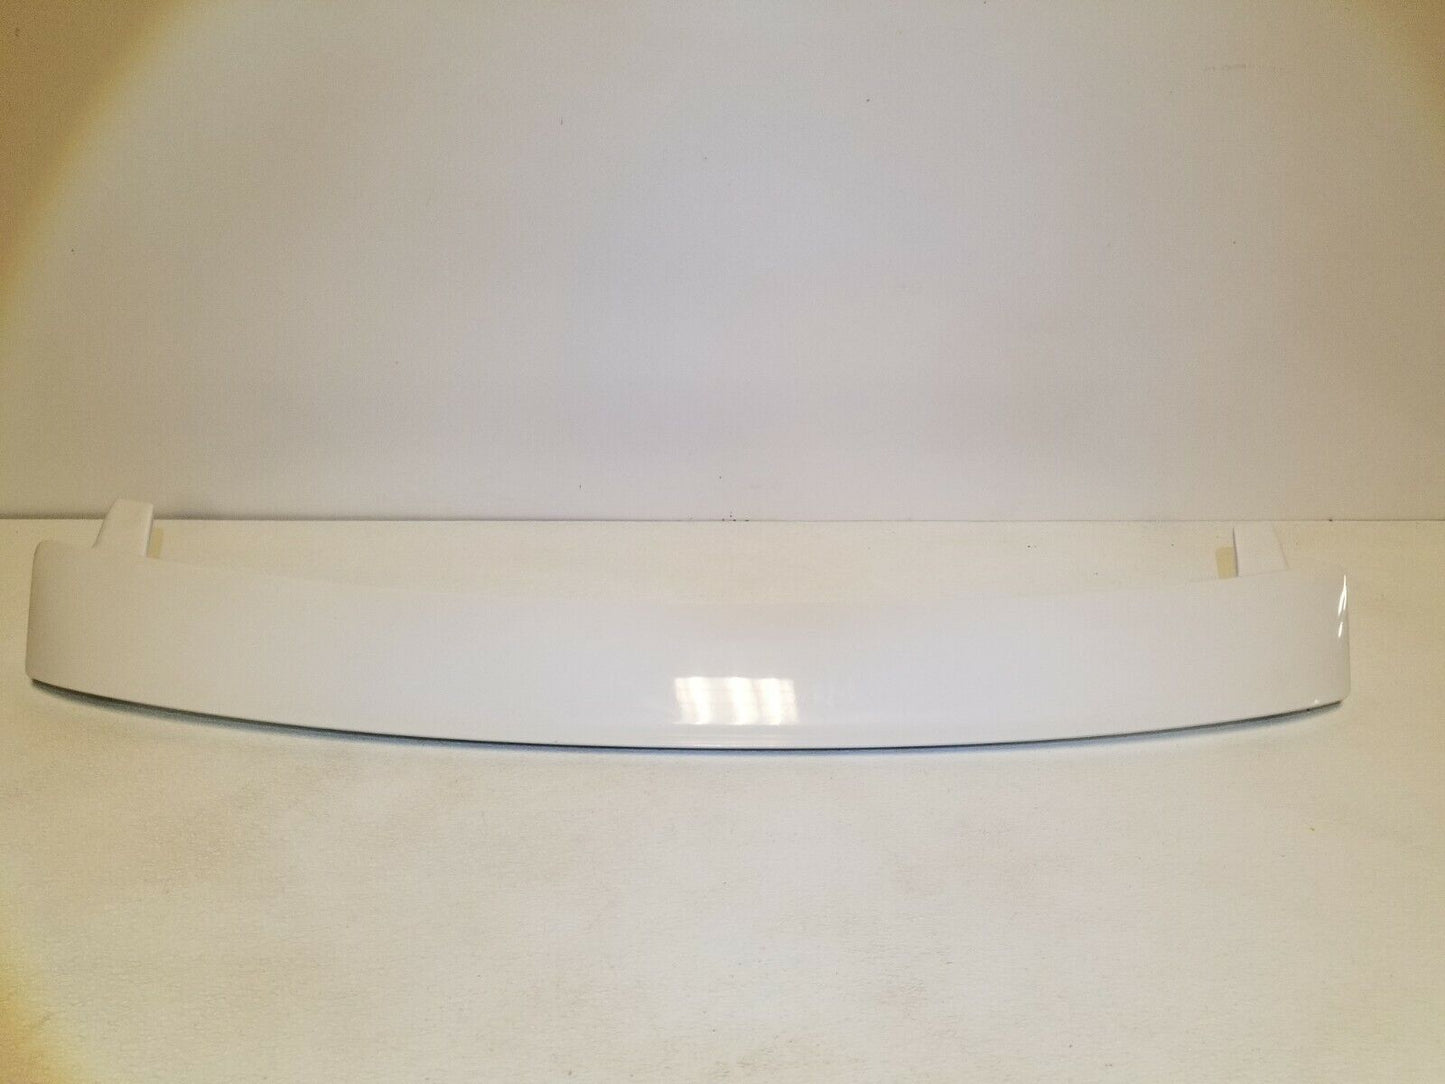 07 08 09 10 11 12 13 Chevy Impala Trunk Lid Wing Spoiler OEM